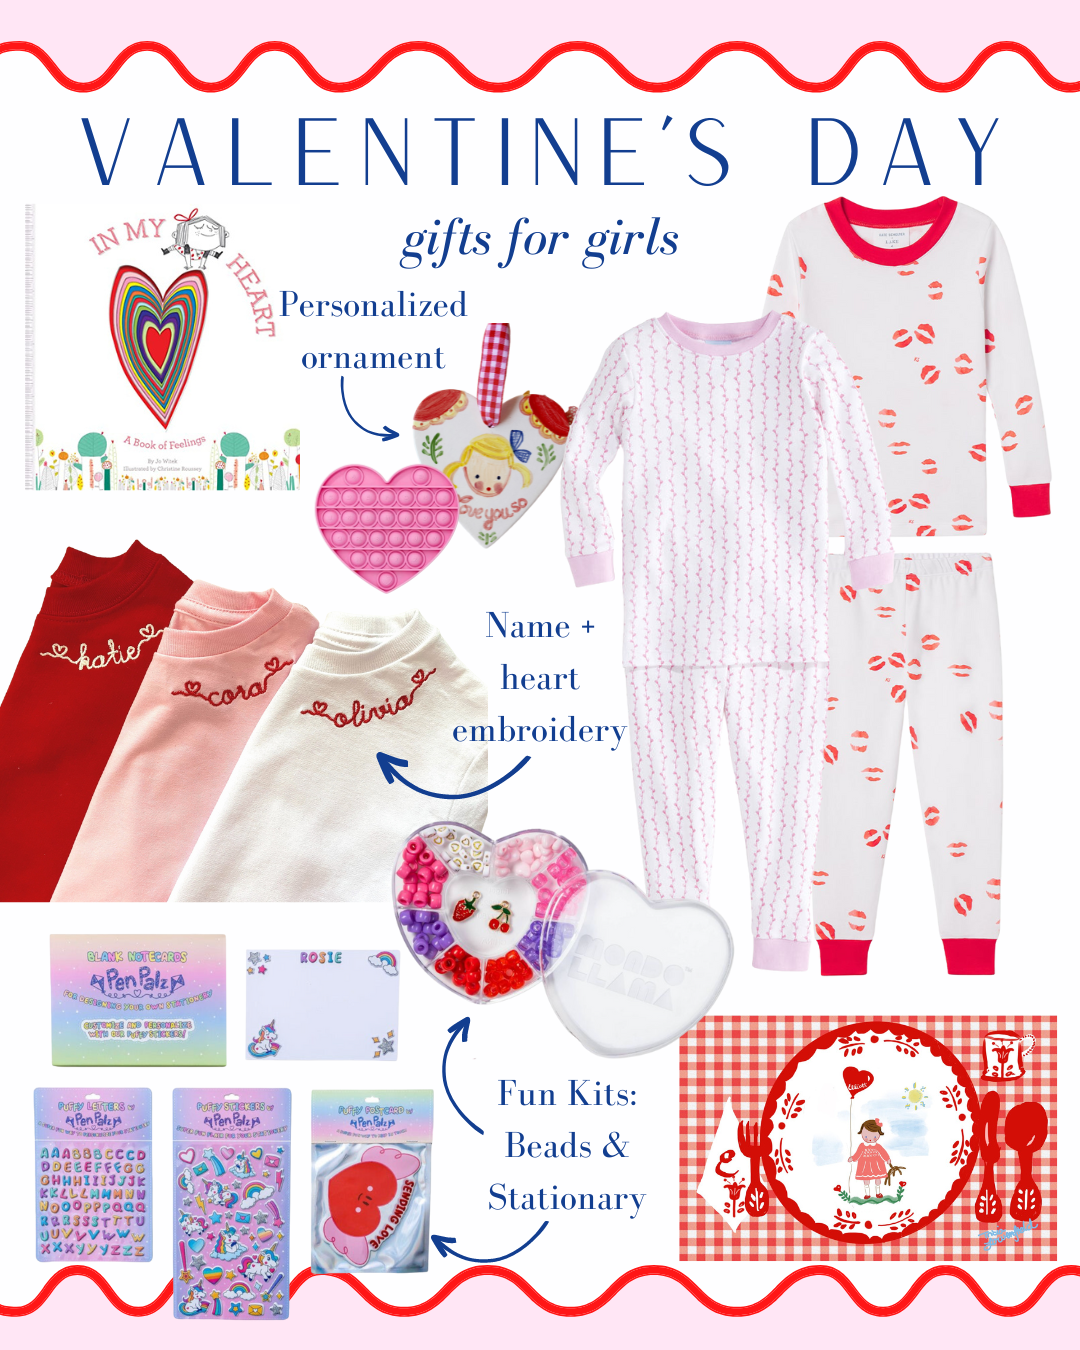 Valentine's Day gifts for daughters, Valentine's Day gifts for family, Valentine's Day gifts for girls, Valentine's gifts for little girls, Valentine's Day crafts for kids, Valentine's Day gifts for toddler girls